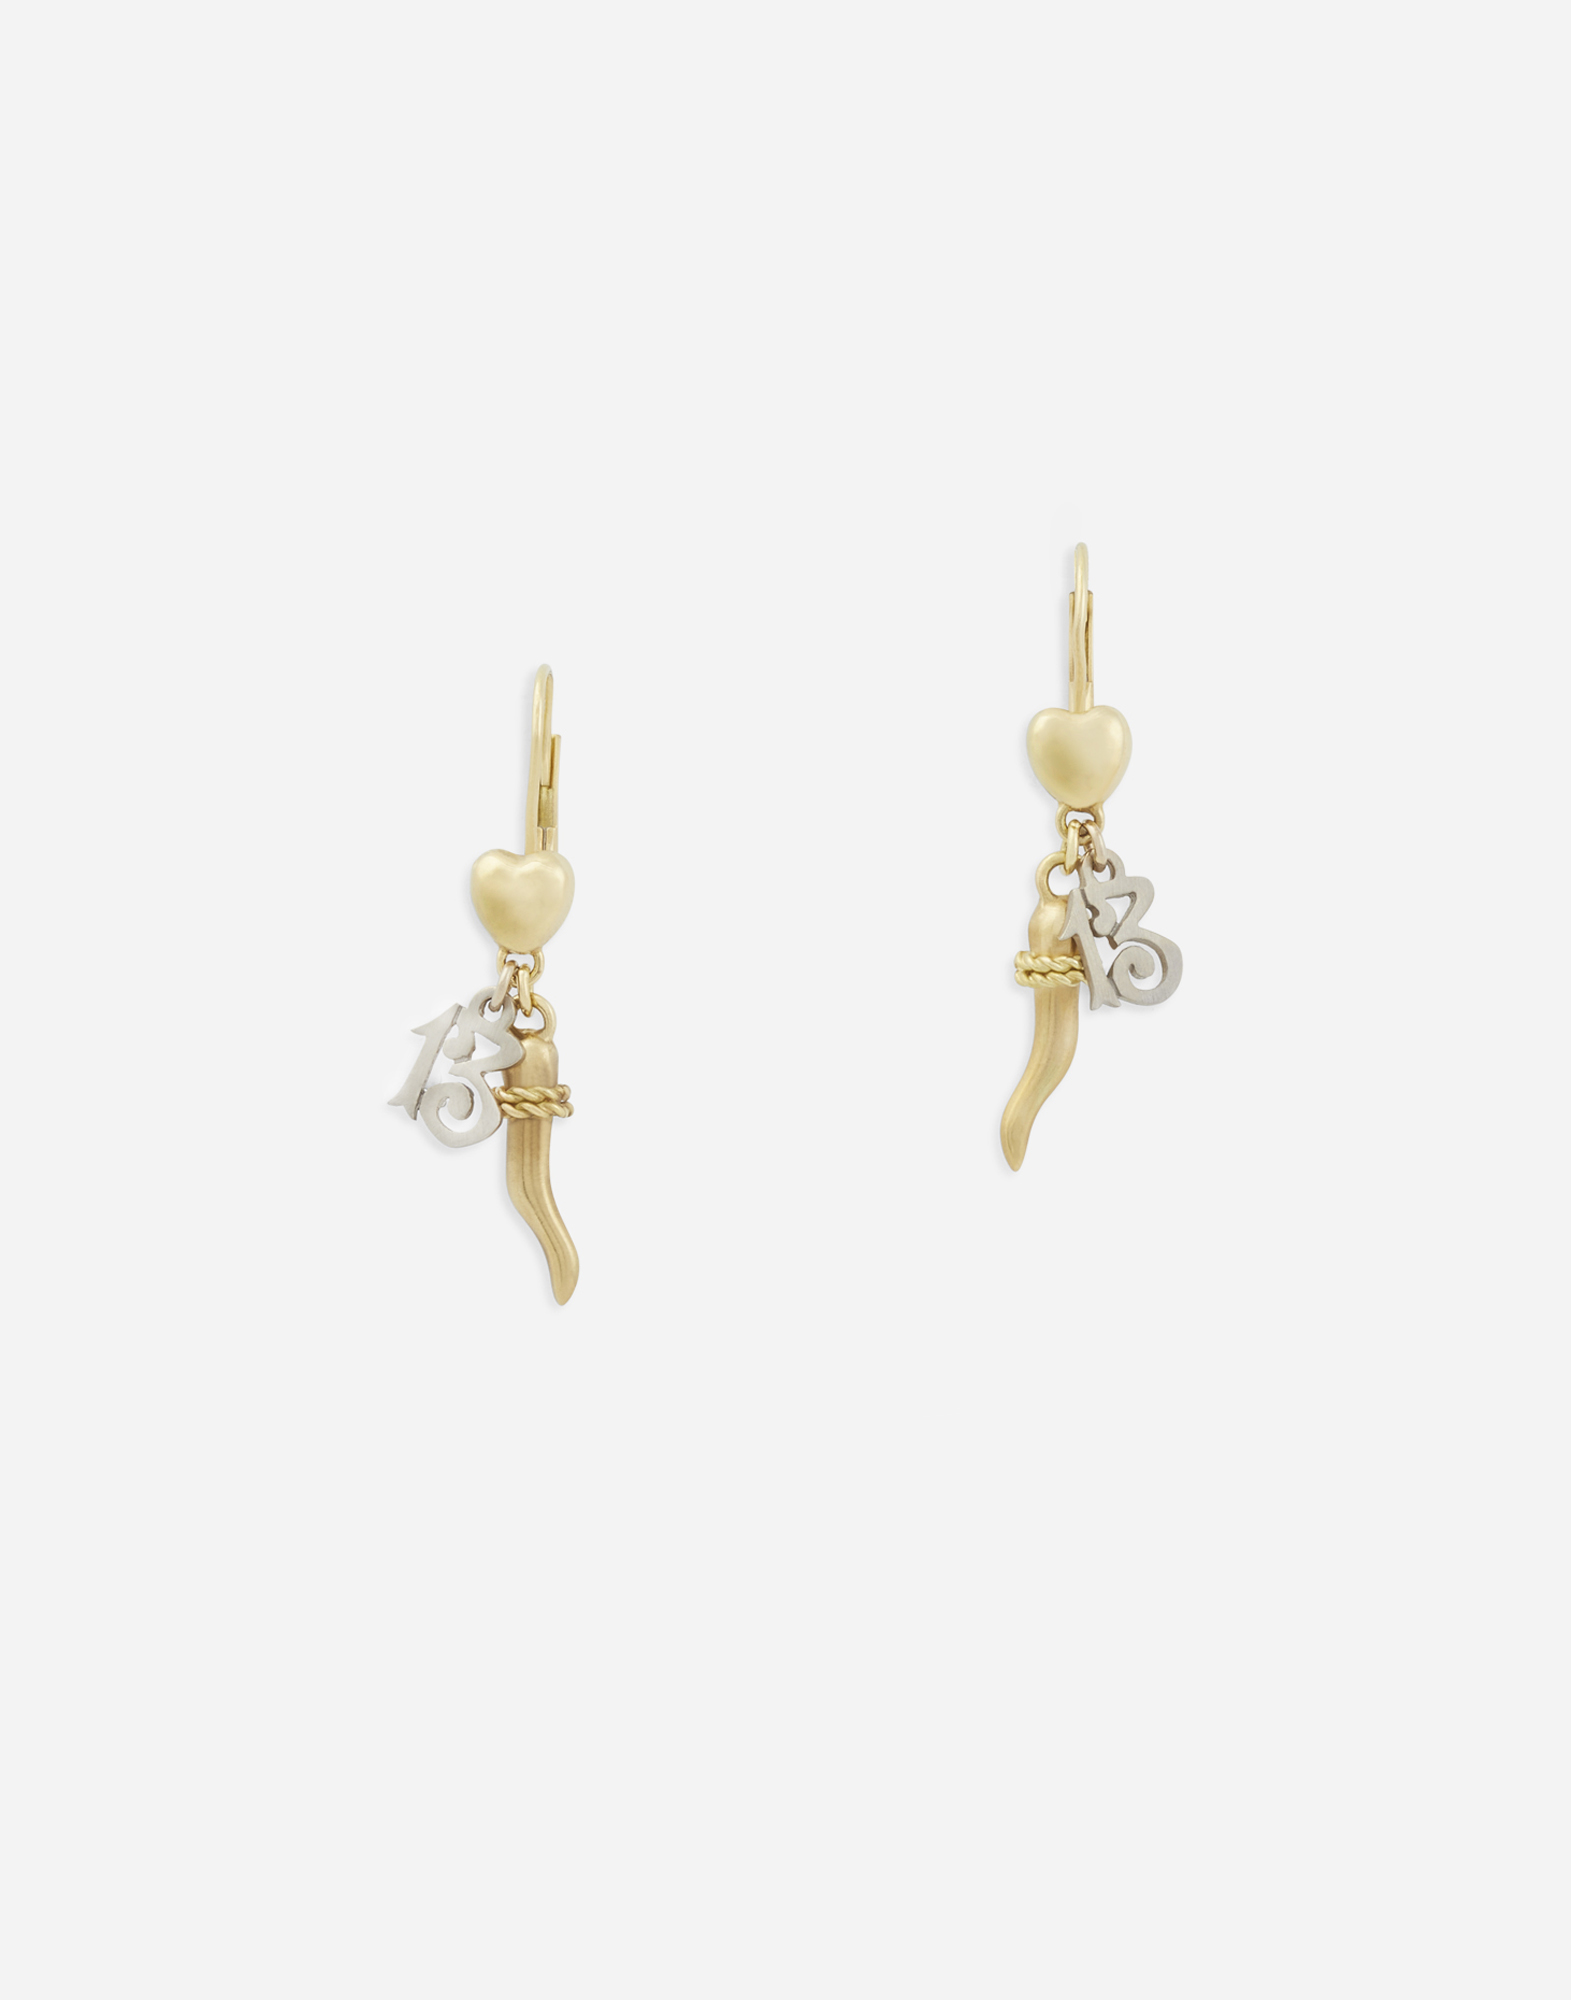 Family earrings in yellow and white gold in Gold